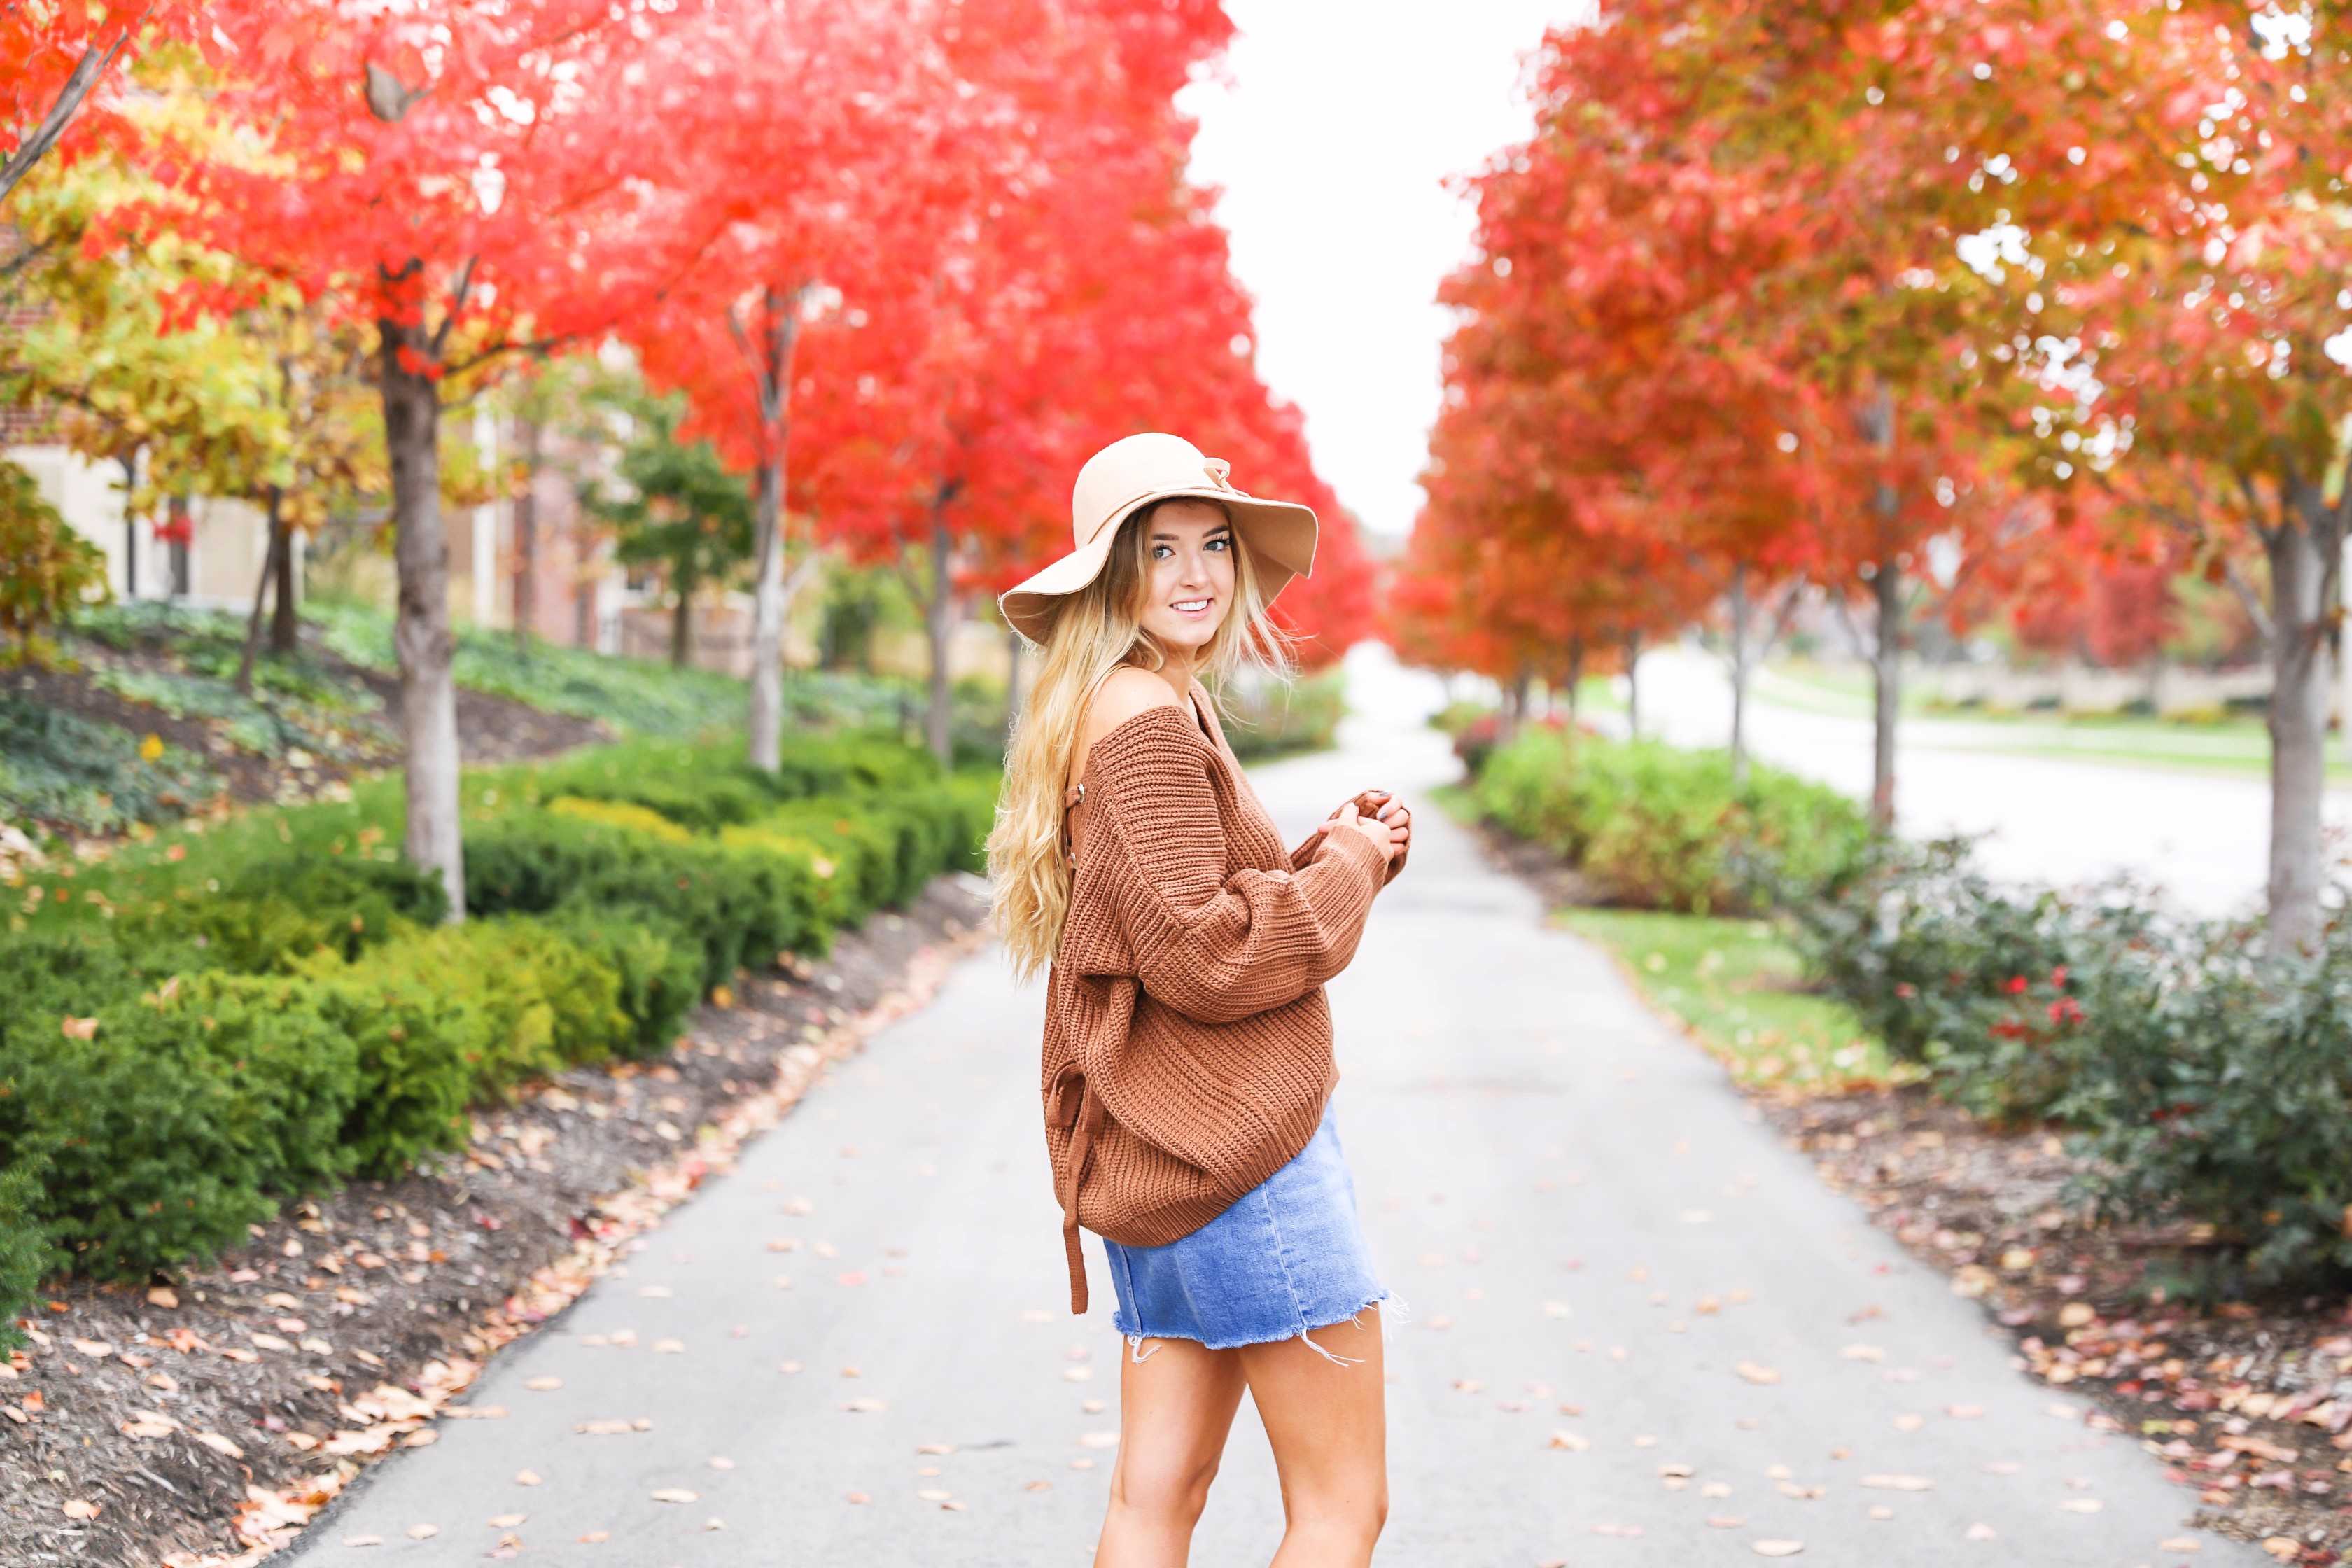 Burnt orange sweater that is crisscrossed tied in the back! Perfect for fall paired with jeanskirt and floppy felt hat. Fall and thanksgiving outfit ideas! Details on fashion blog daily dose of charm by lauren lindmark